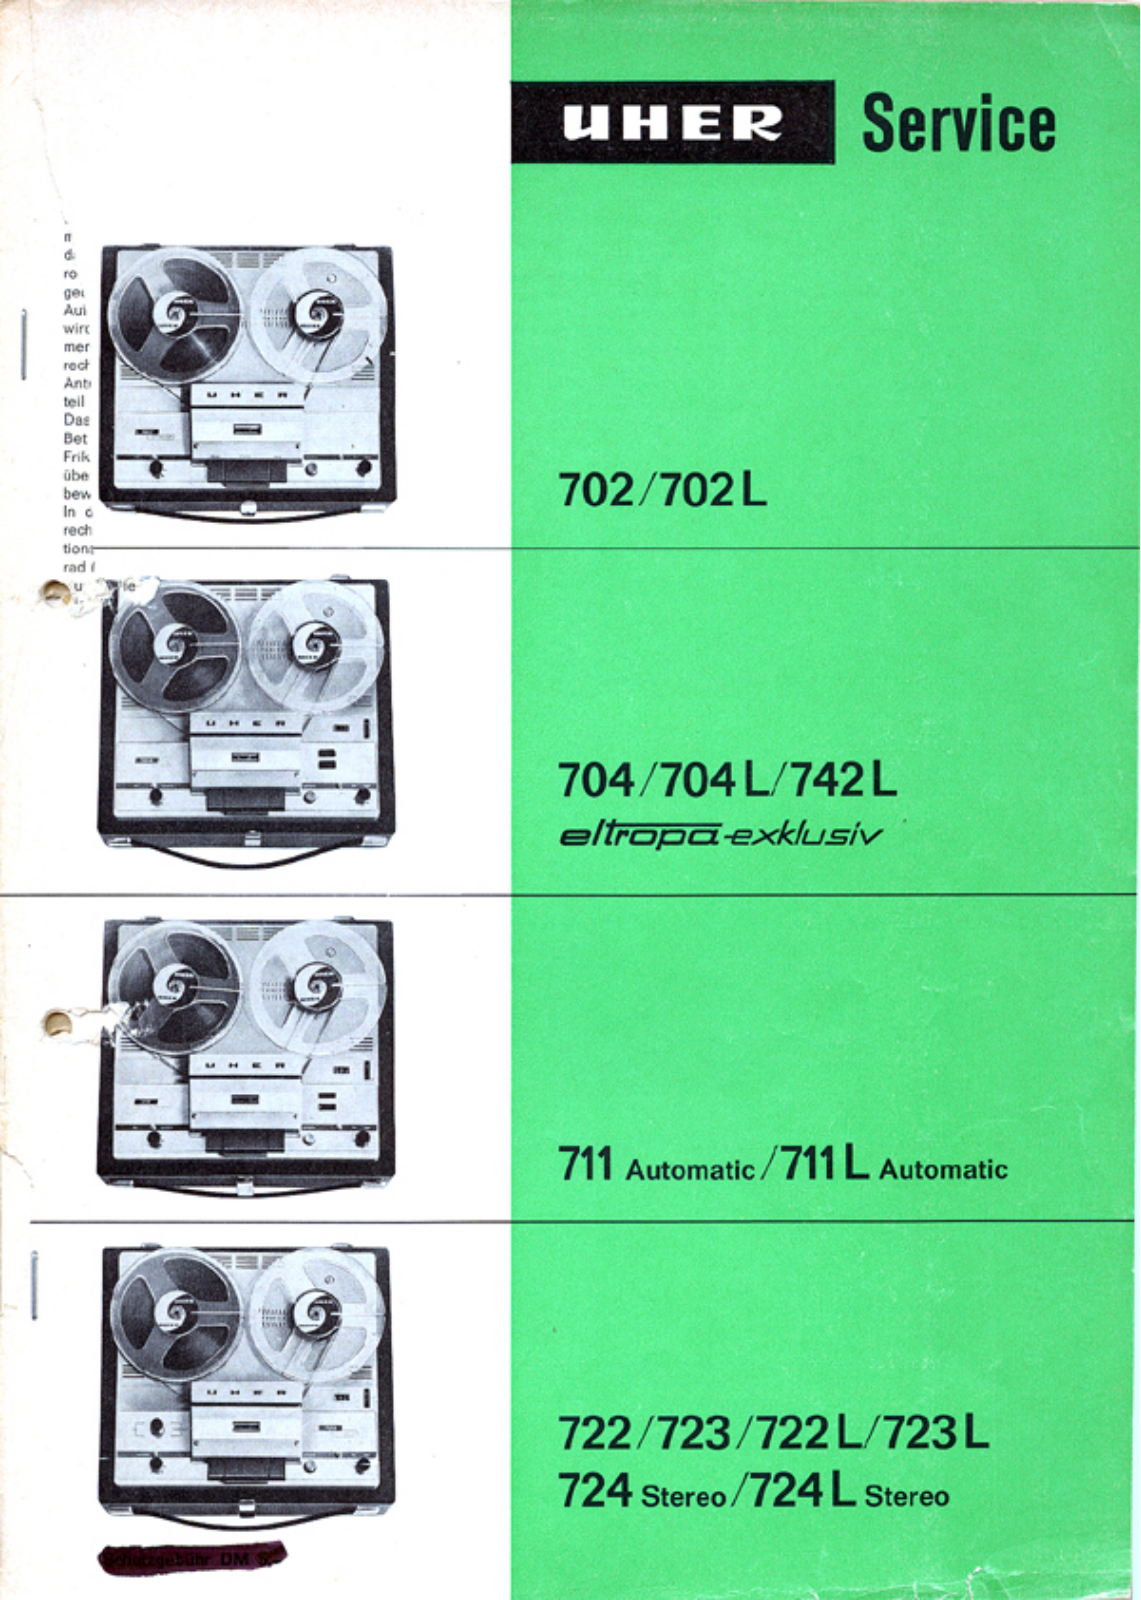 Uher 724-L Stereo Service manual